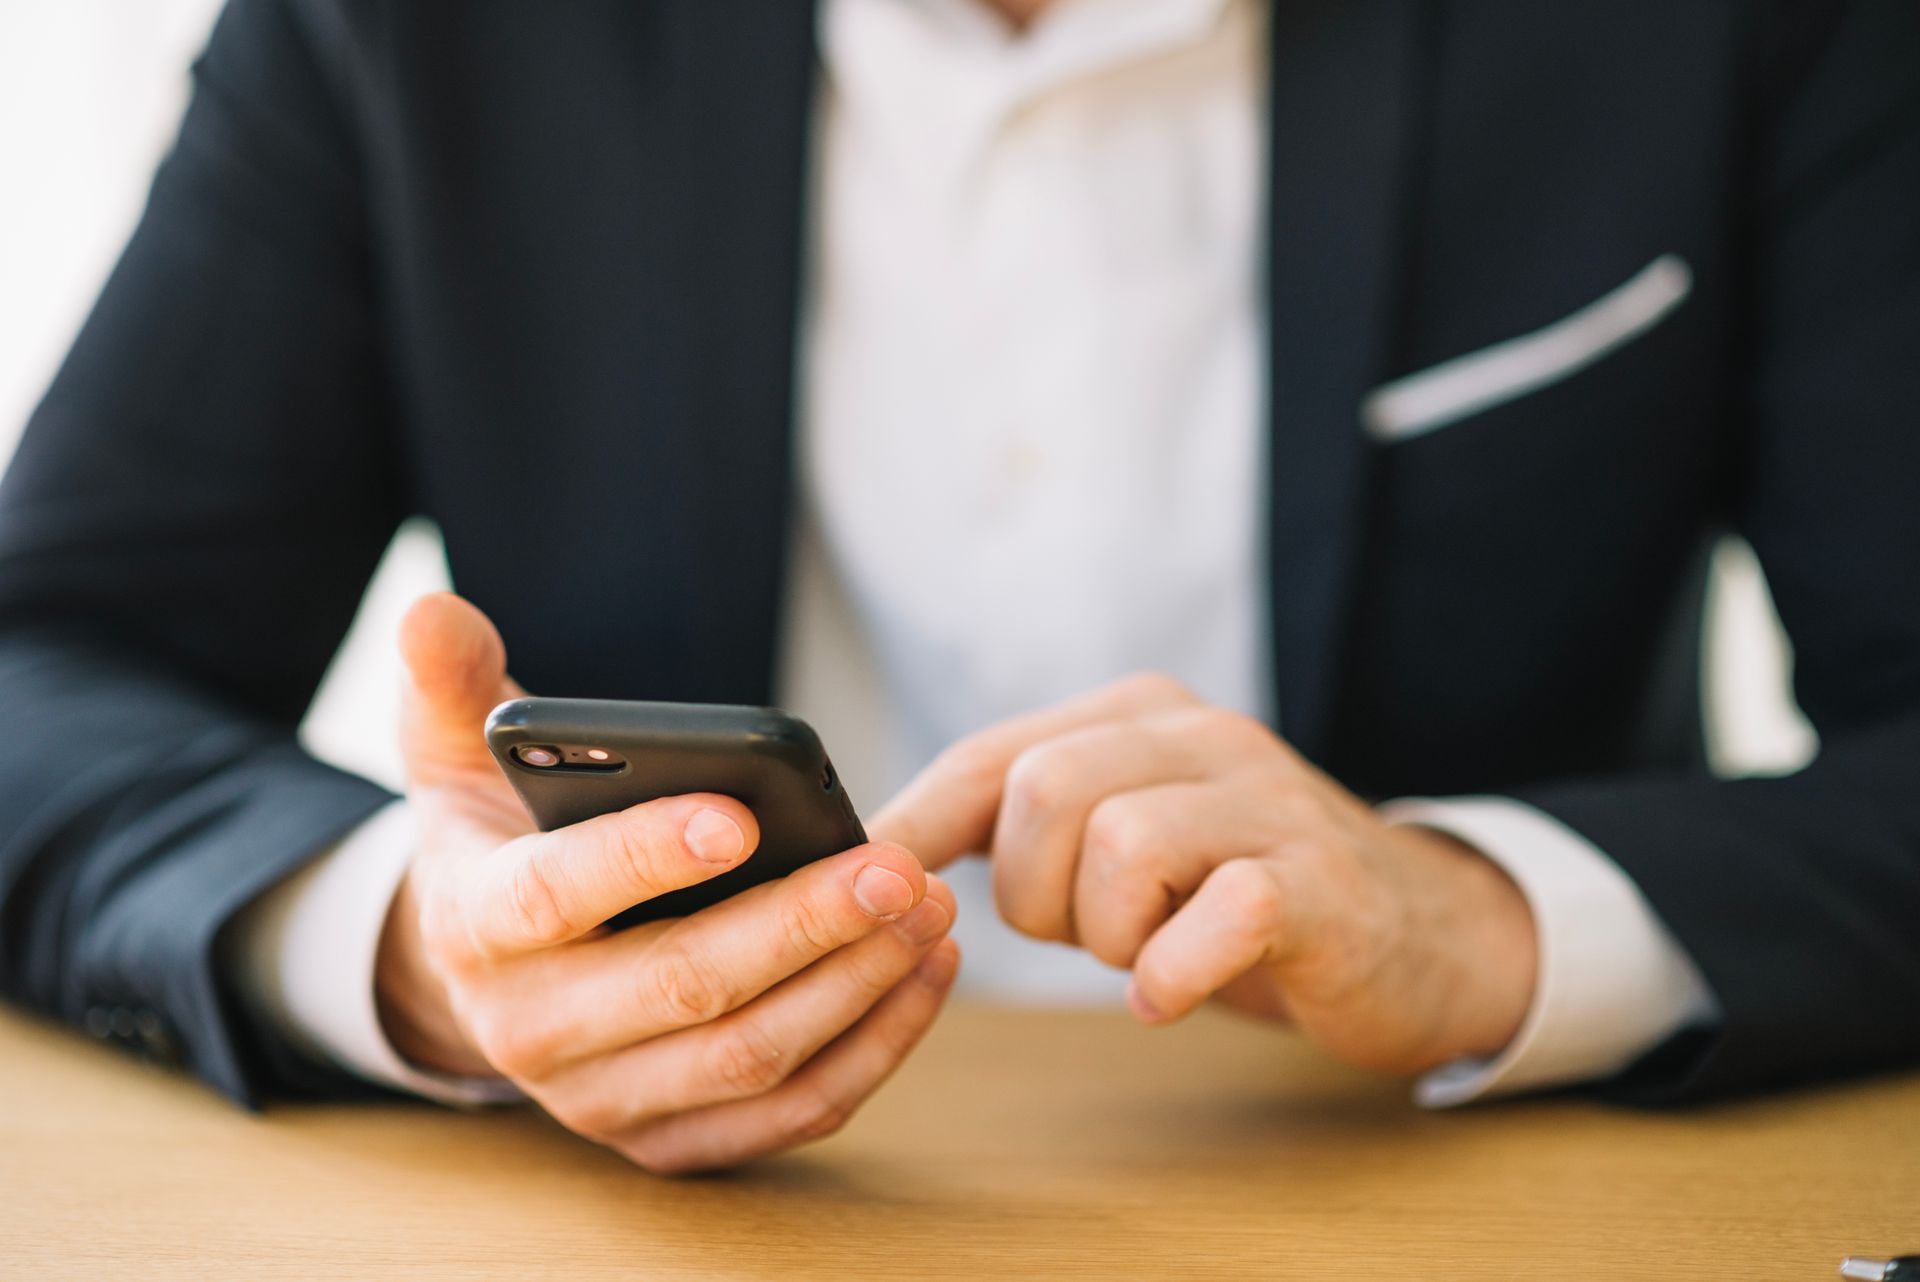 A man in a suit is sitting at a table using a cell phone.